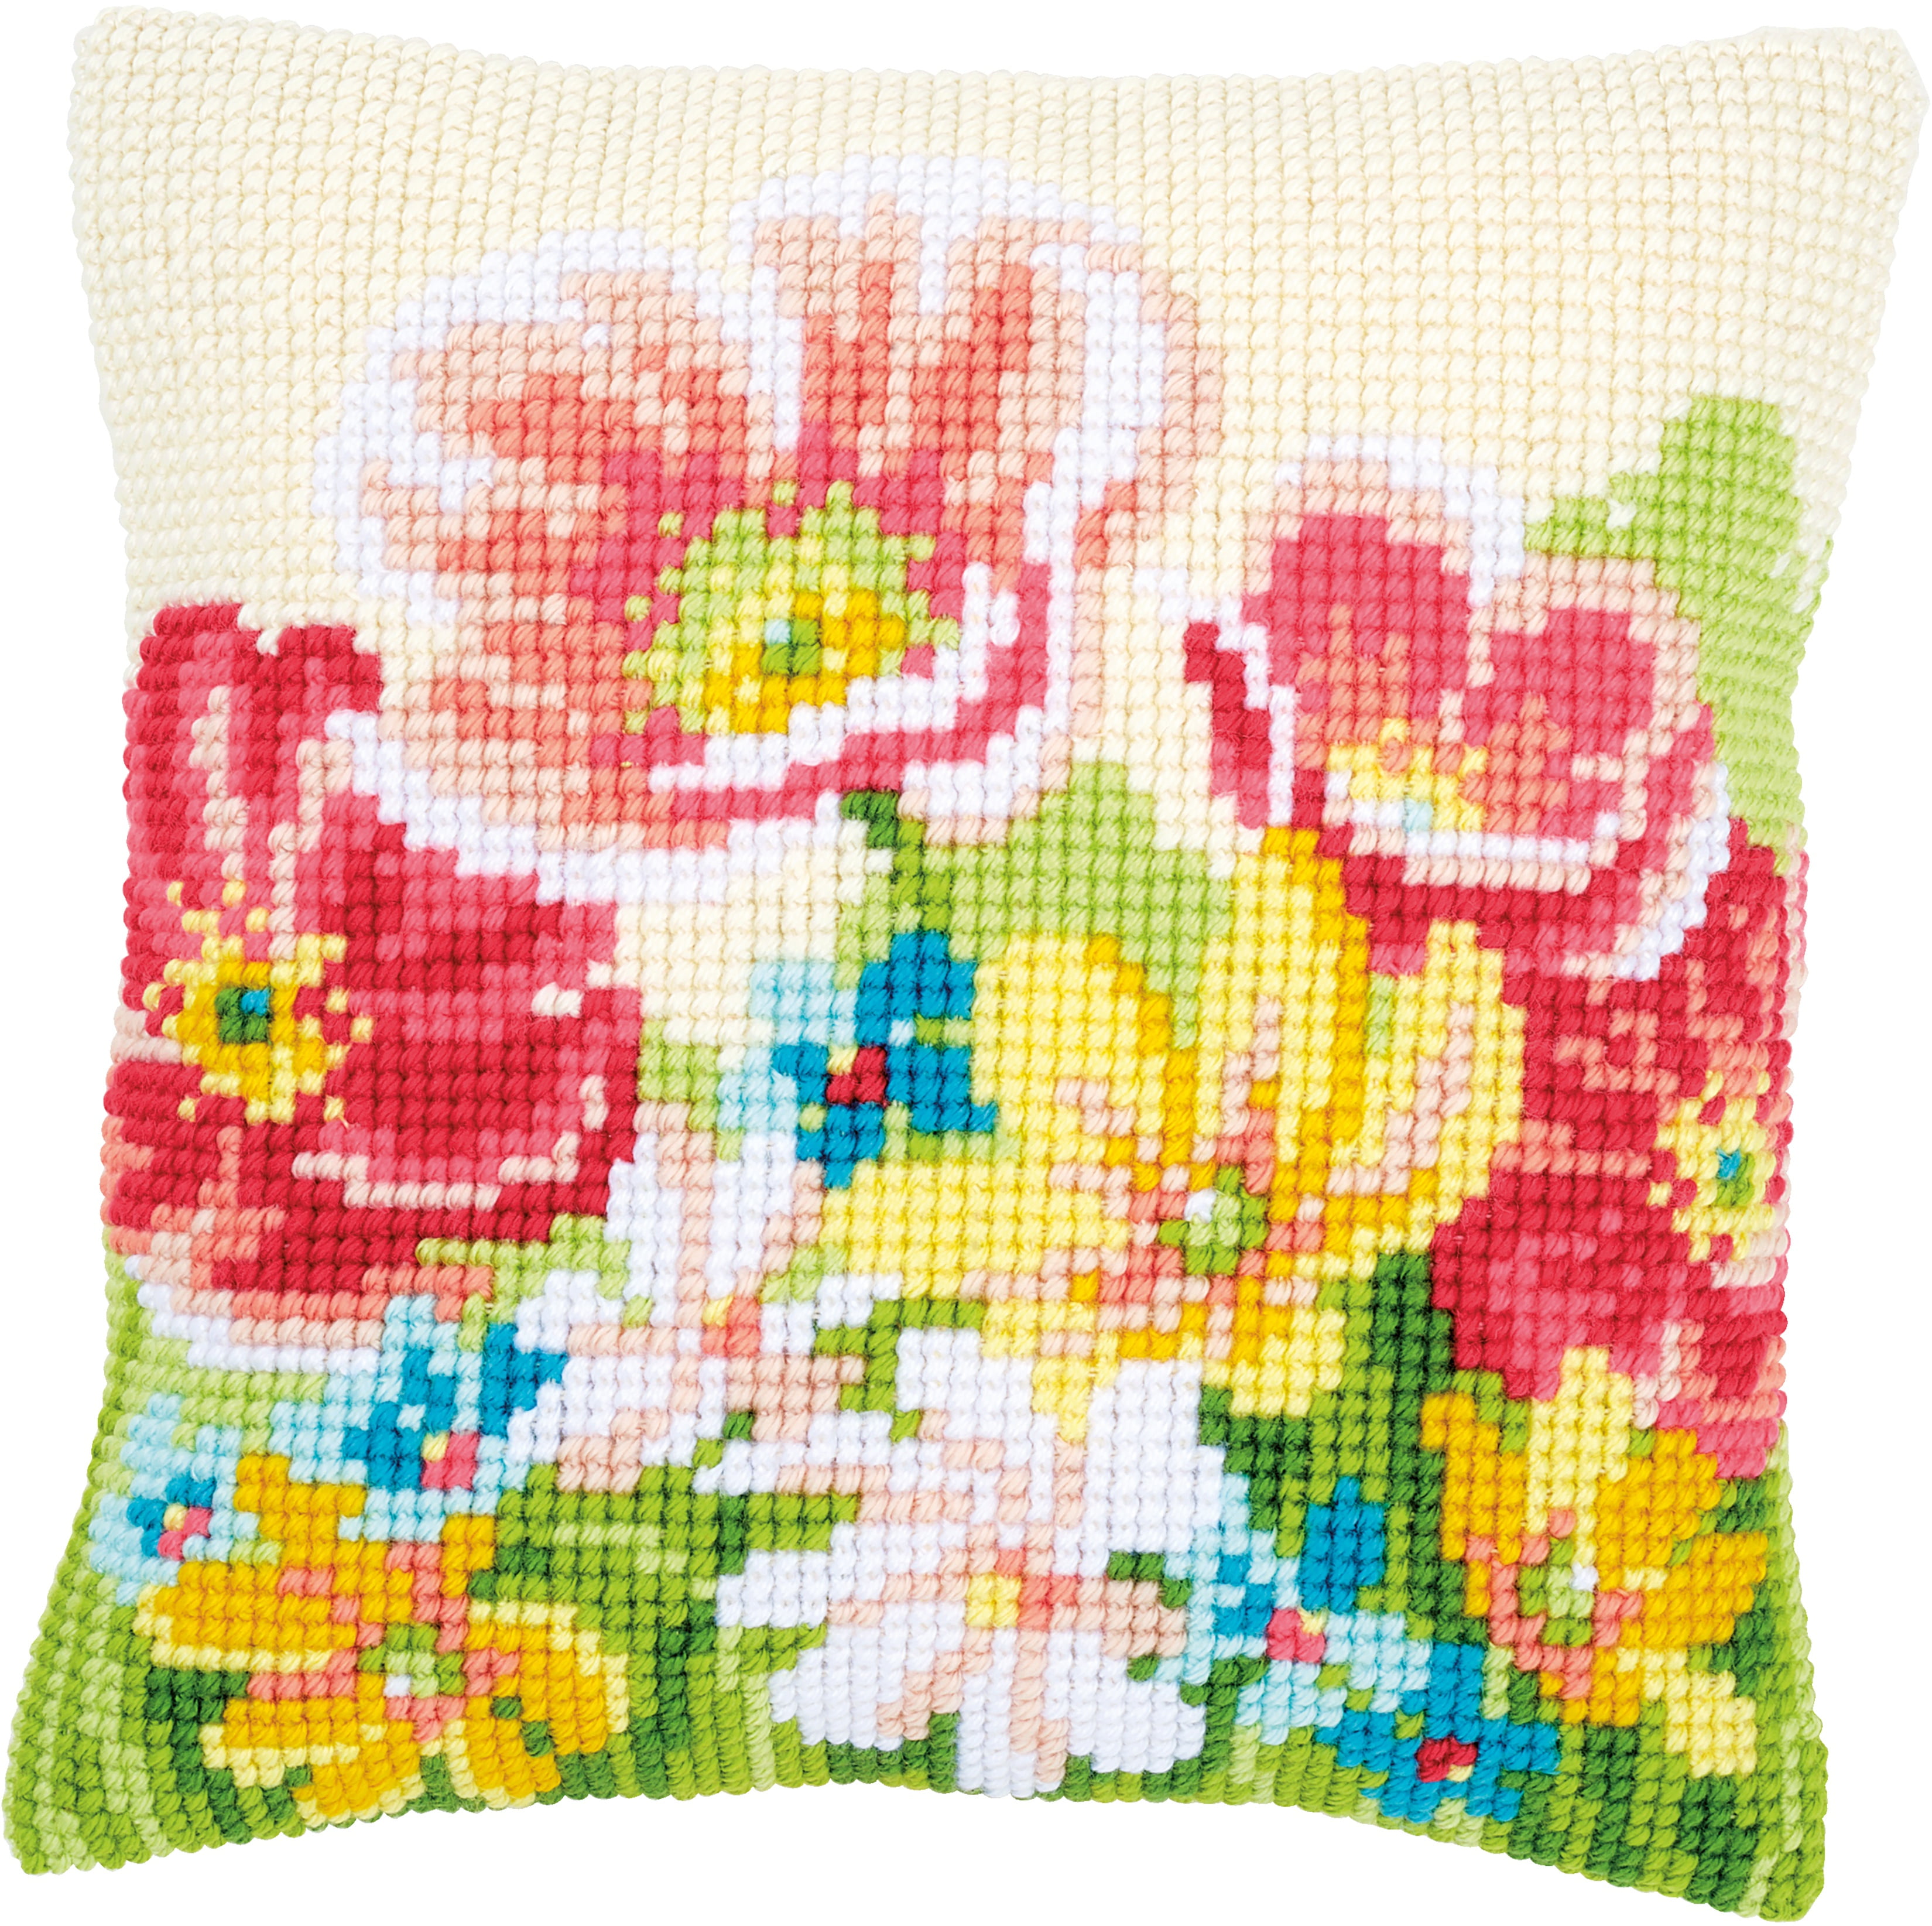 Vervaco Needlepoint Cushion Top Kit 16"X16"-Tit With Blossoms Stitched In Yarn 